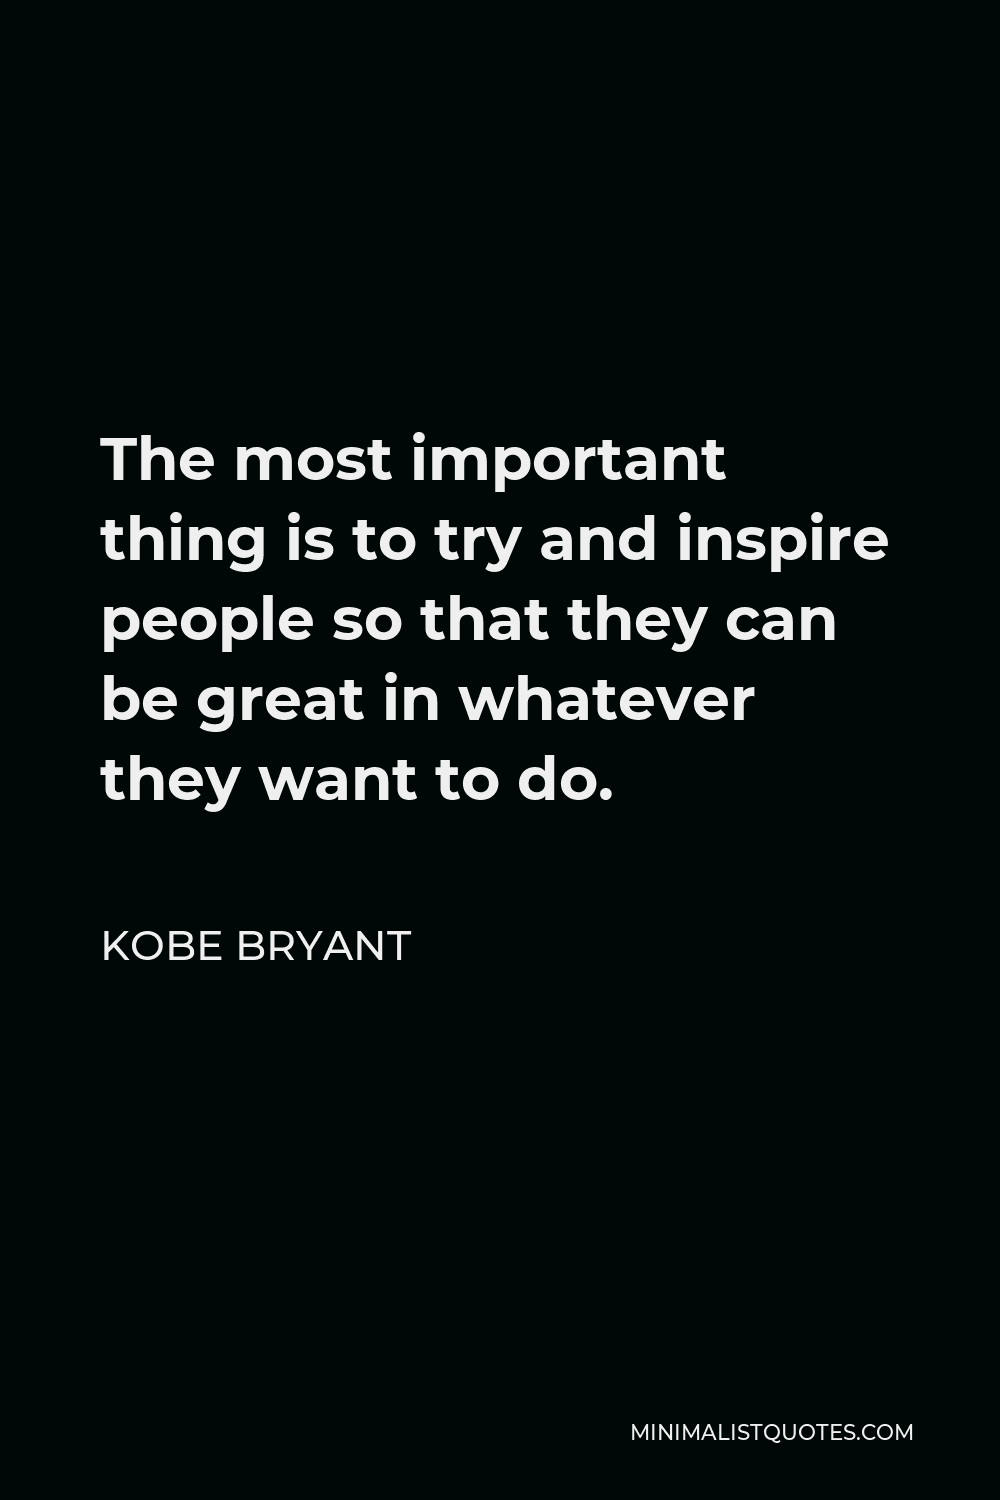 Kobe Bryant Quote - The most important thing is to try and inspire people so that they can be great in whatever they want to do.